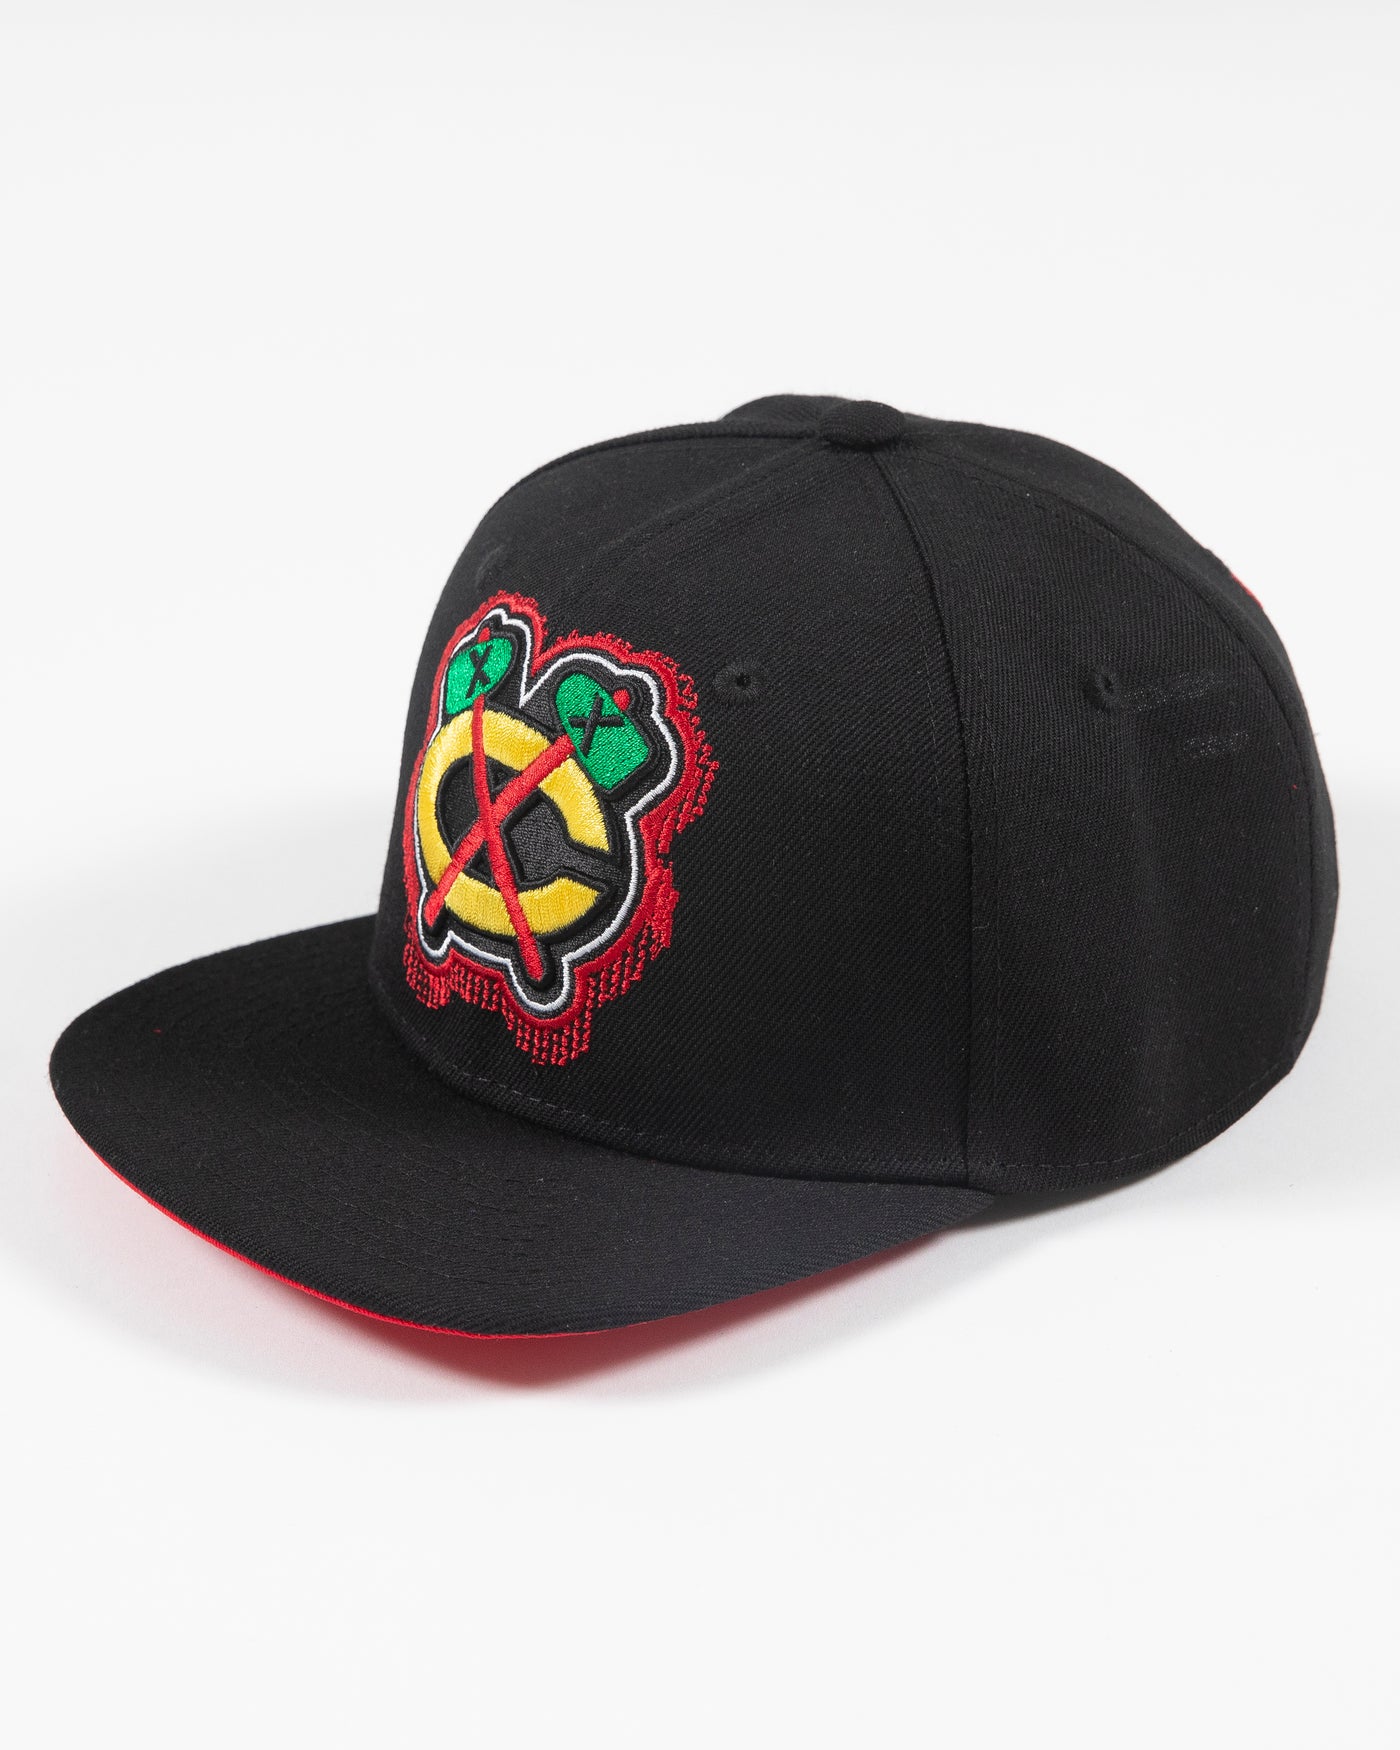 black youth Mitchell & Ness snapback cap with Chicago Blackhawks secondary tomahawk logo embroidered on front and 75th anniversary patch embroidered on right side - left angle lay flat